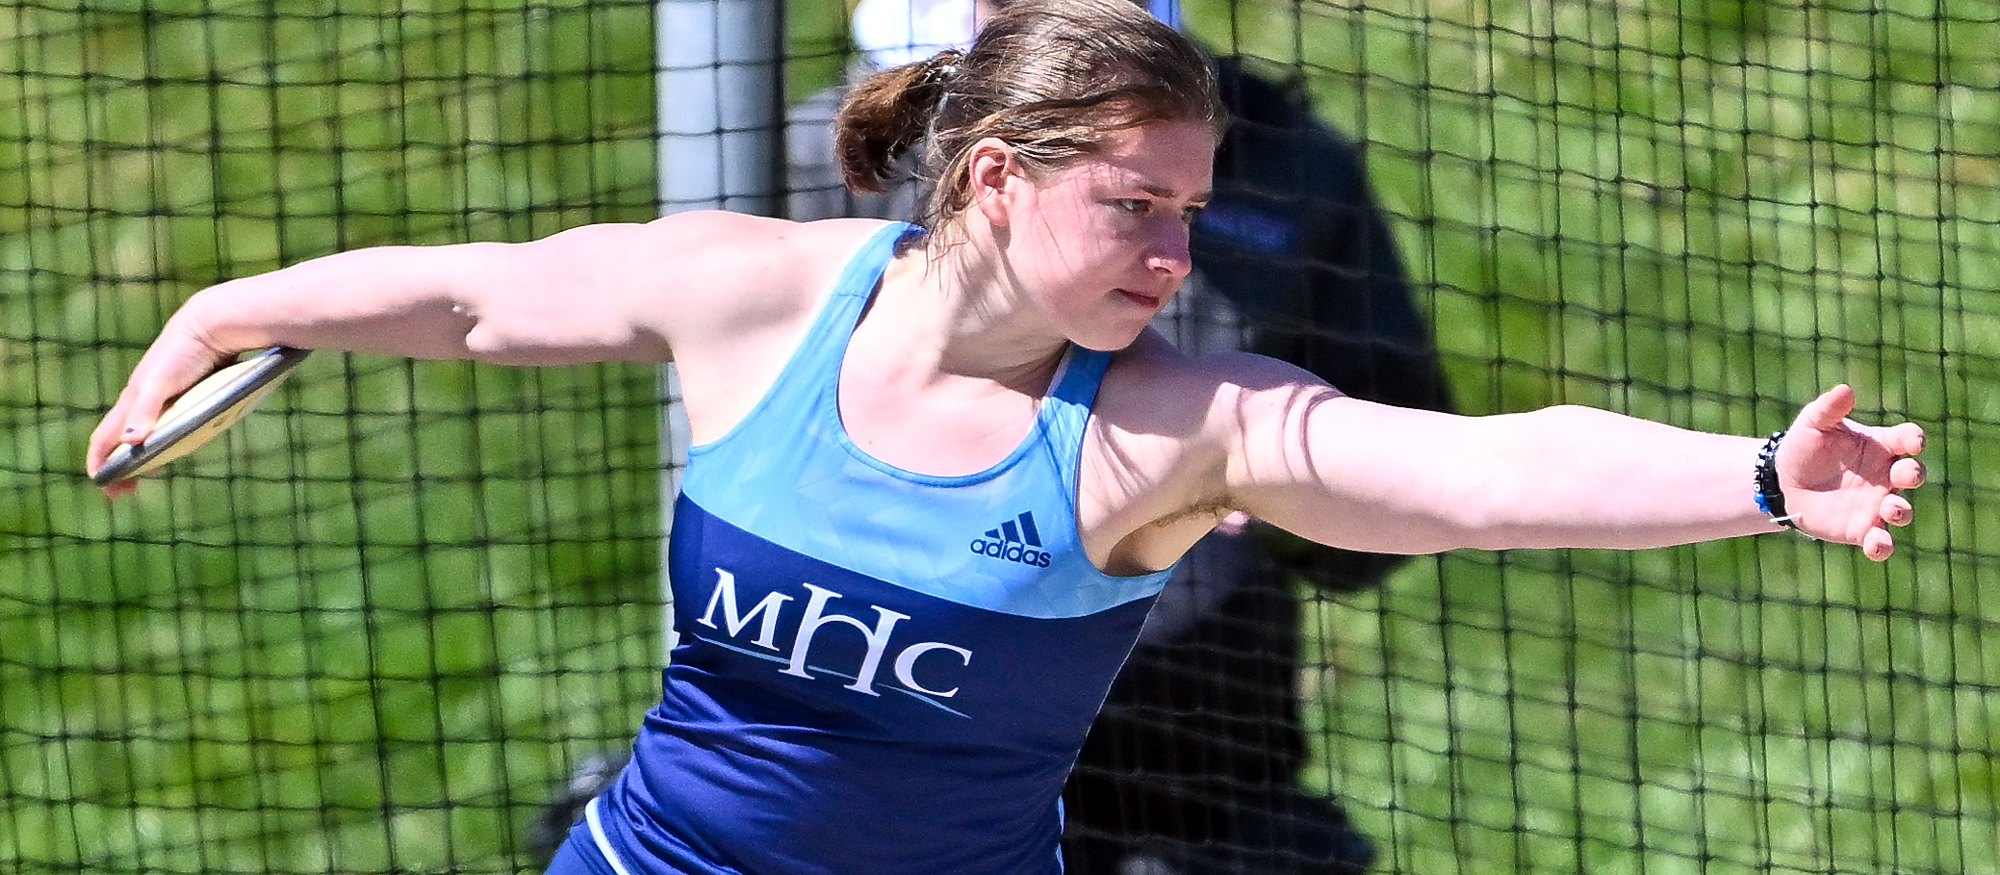 Emma Doyle placed in the top four in both the shot put and discus throw at the Amherst Spring Fling on April 8, 2023. (Bob Blanchard/RJB Sports)